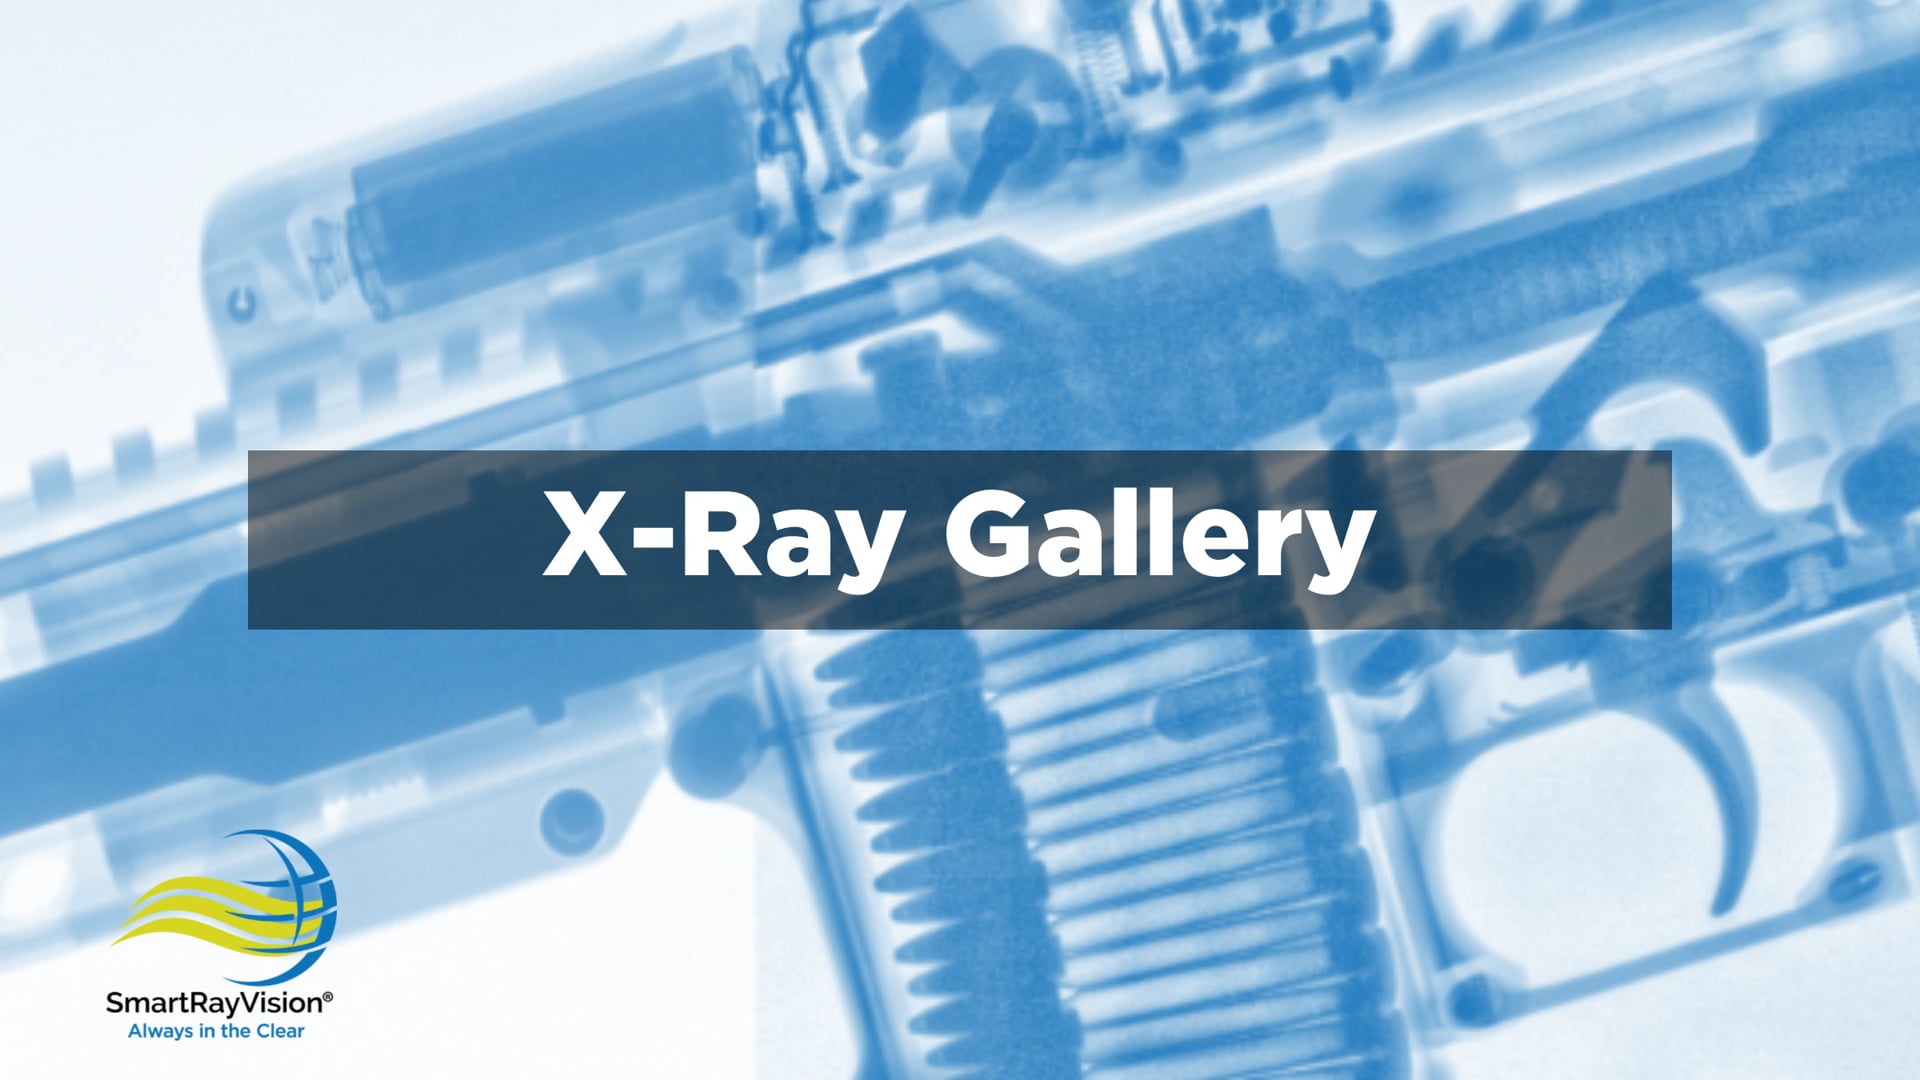 X-Ray Gallery